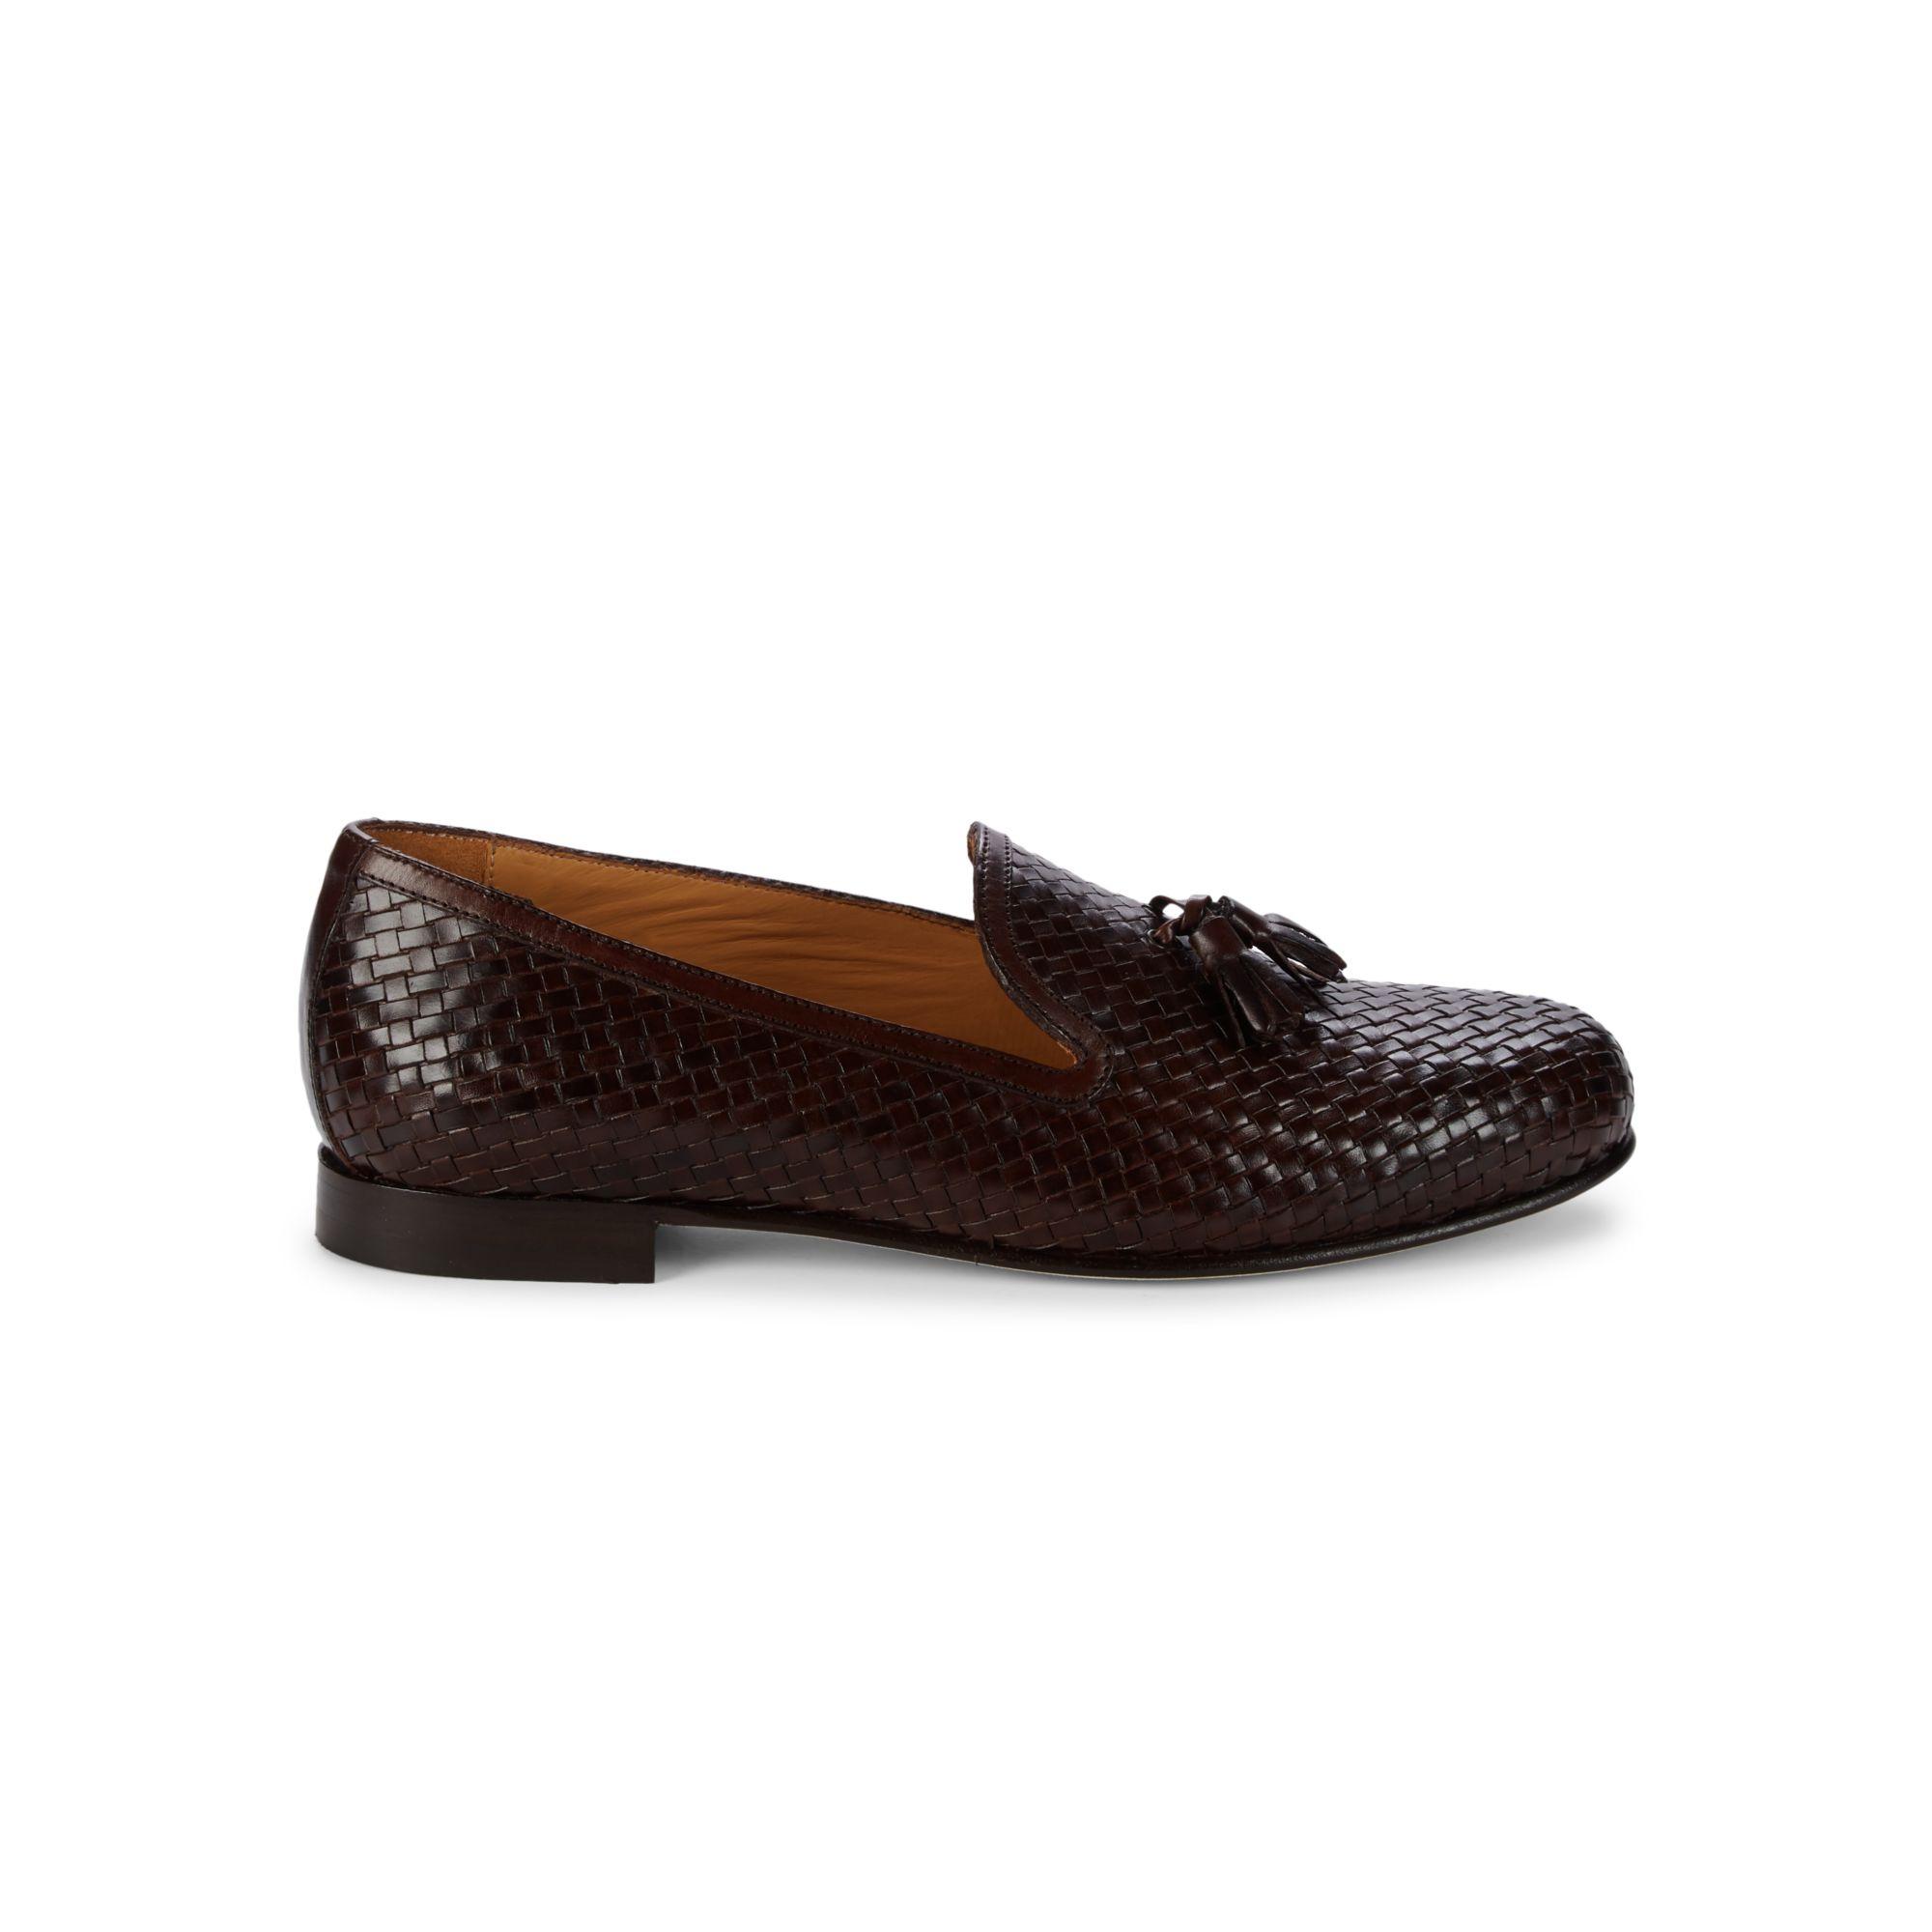 Saks Fifth Avenue Woven Leather Tassel Loafers in Brown for Men - Lyst